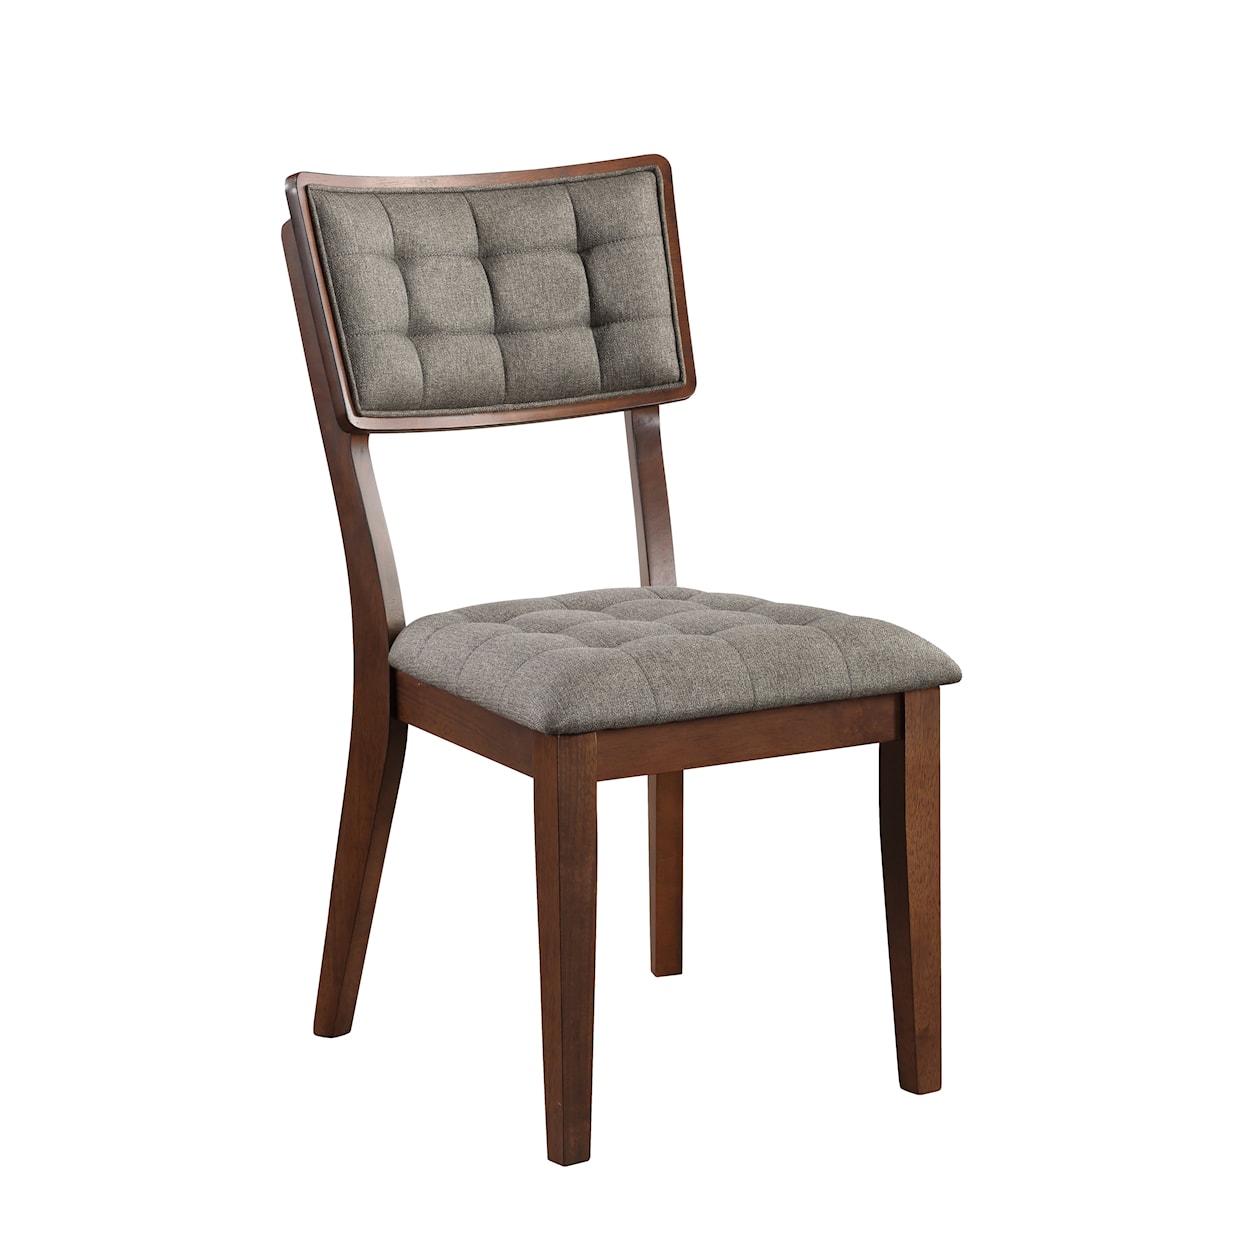 Warehouse M 8052 Dining Chair